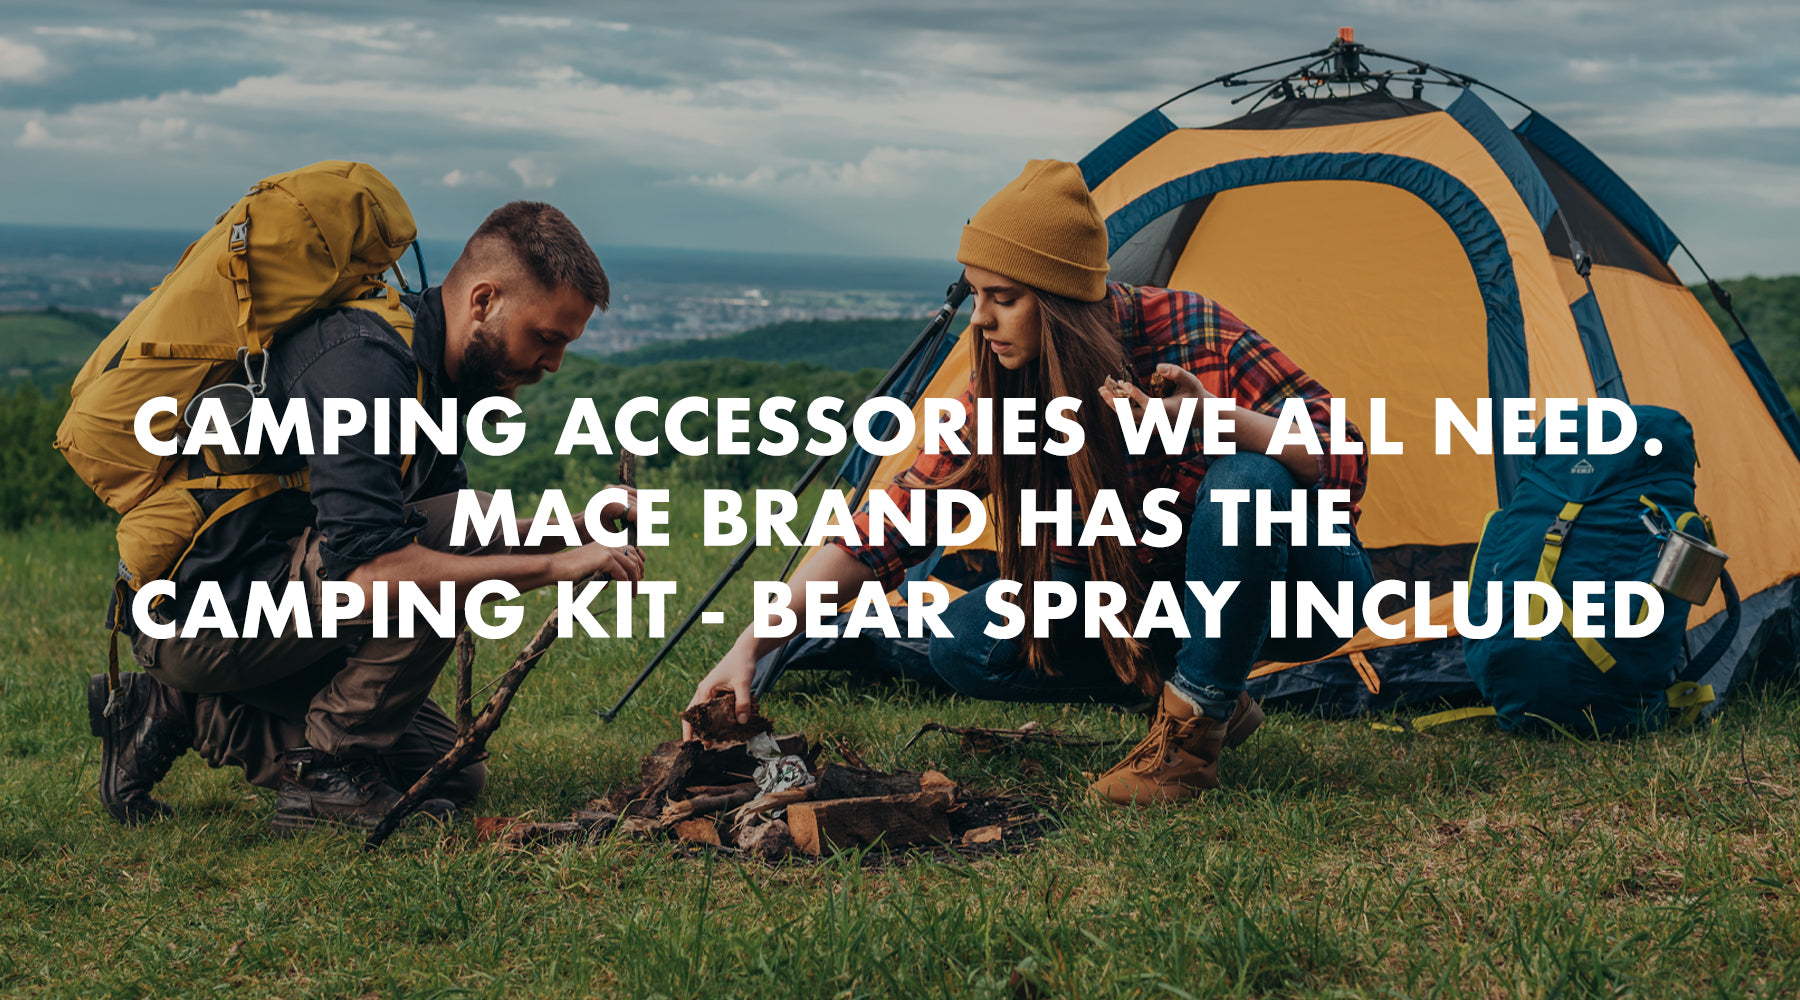 Camping Accessories We All Need - Mace Brand has the Camping Kit